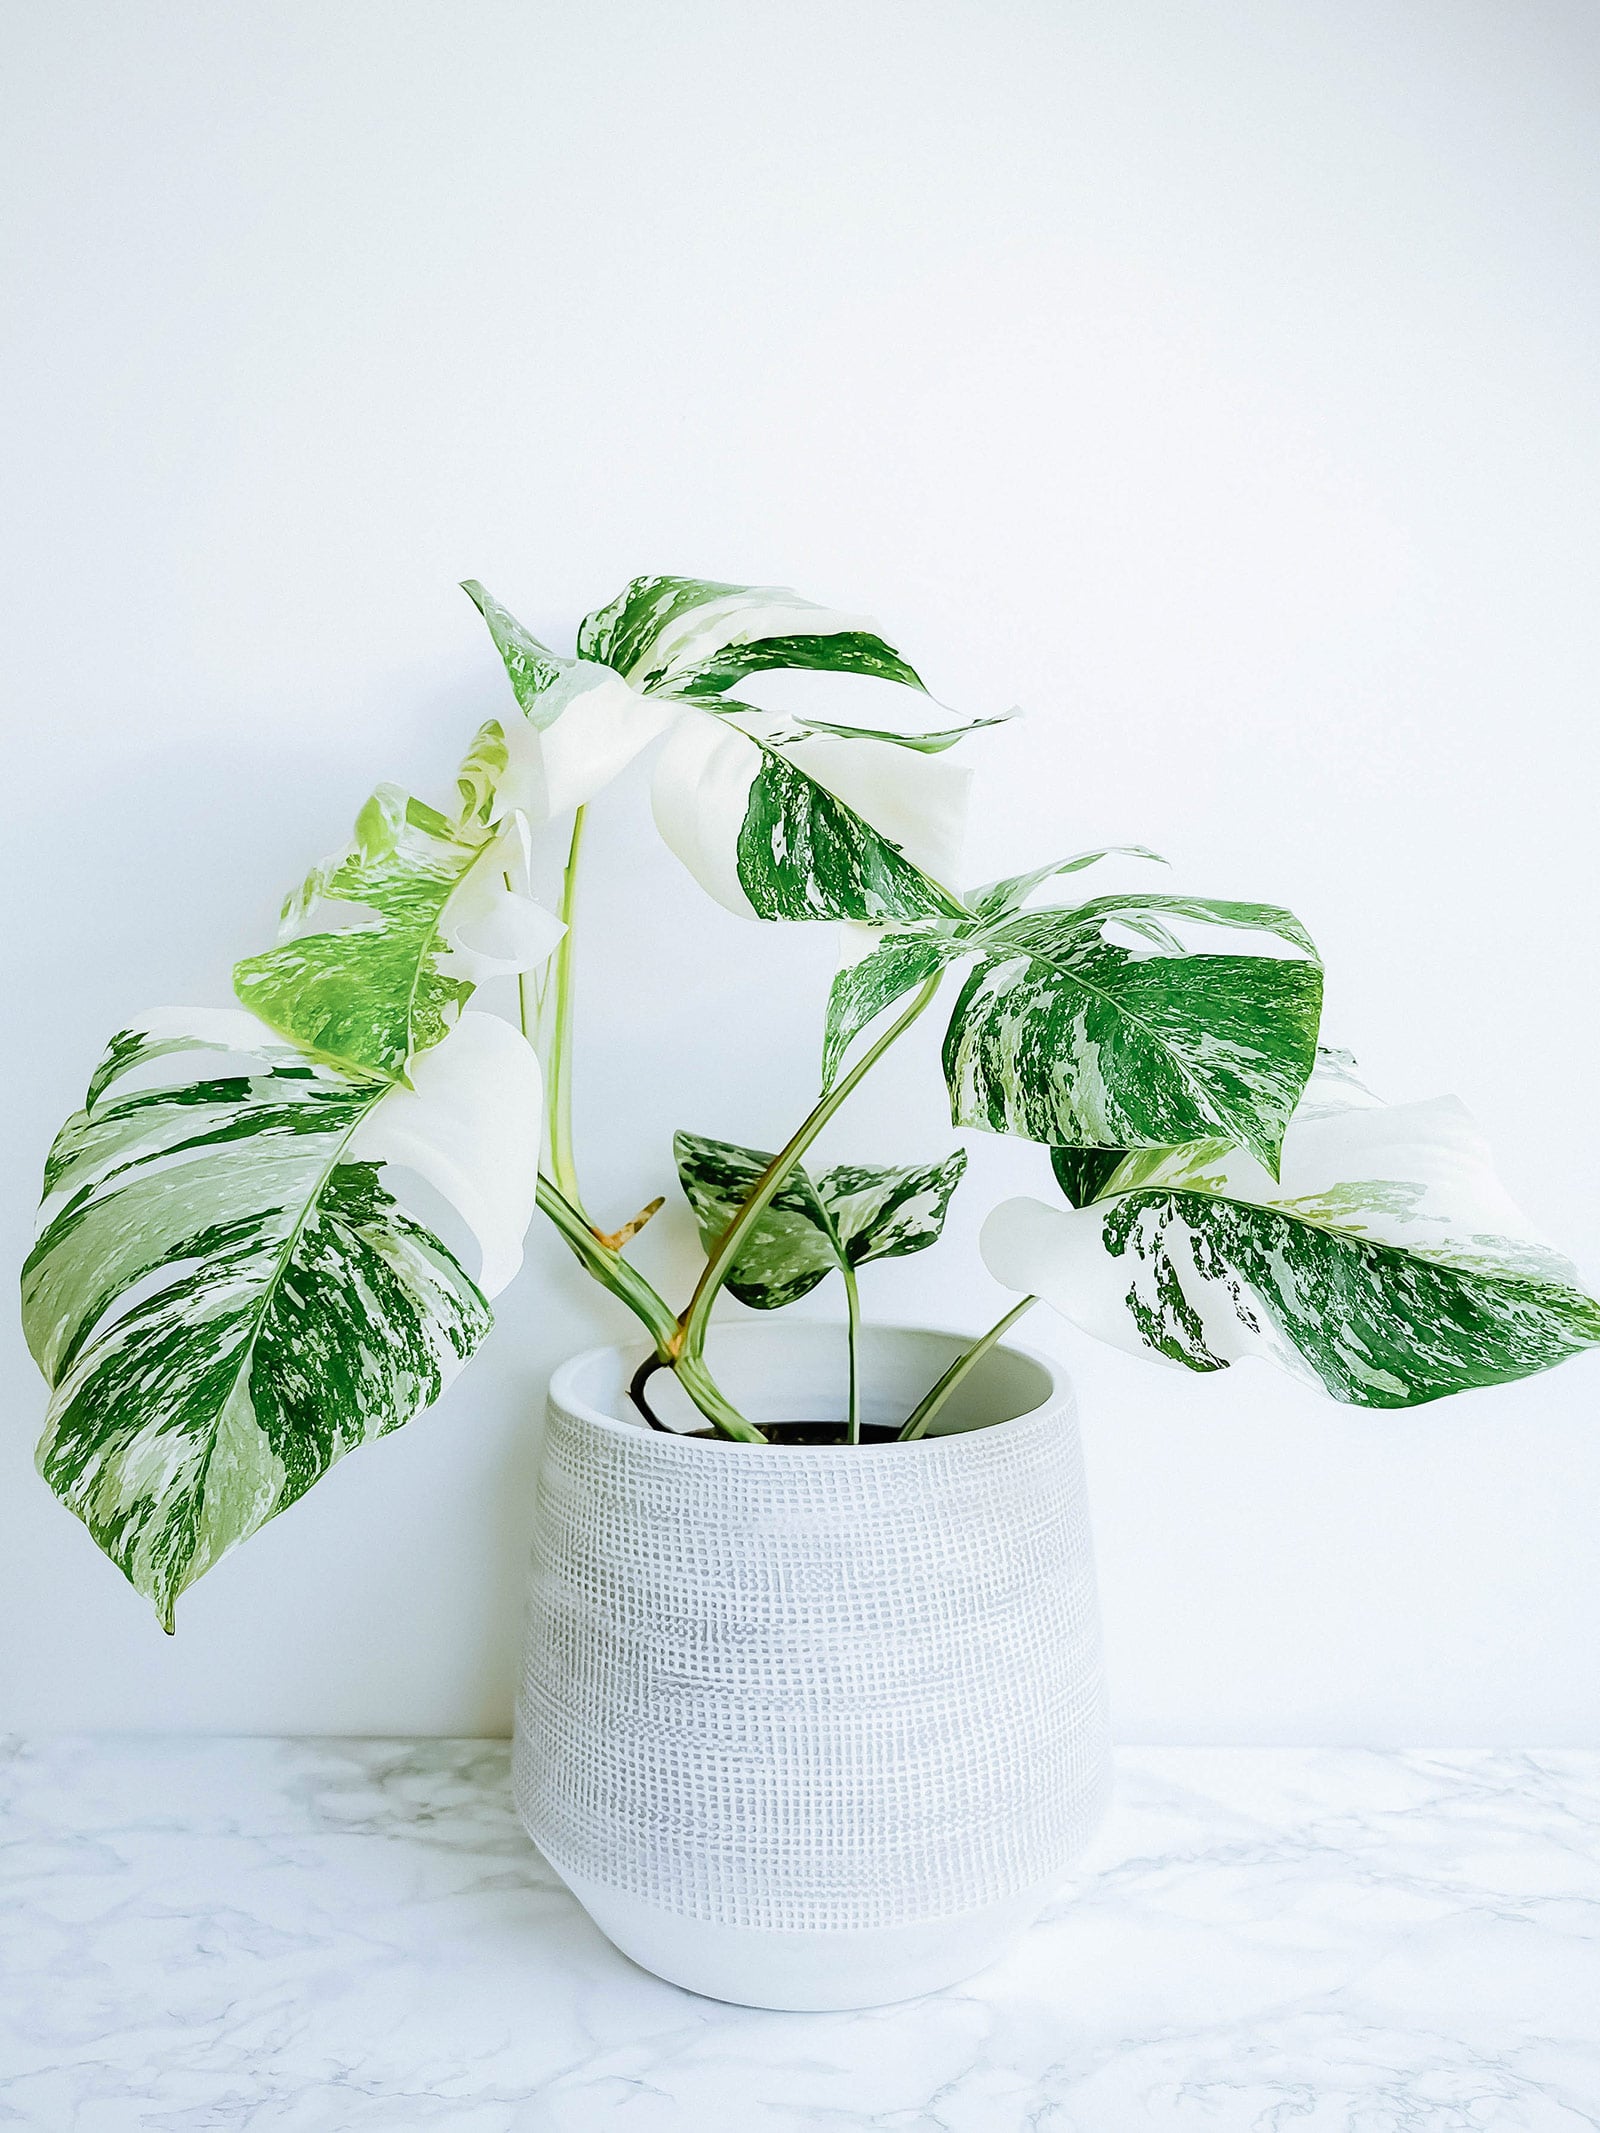 Young Monstera Variegata houseplant in a white textured ceramic pot on a white marble surface